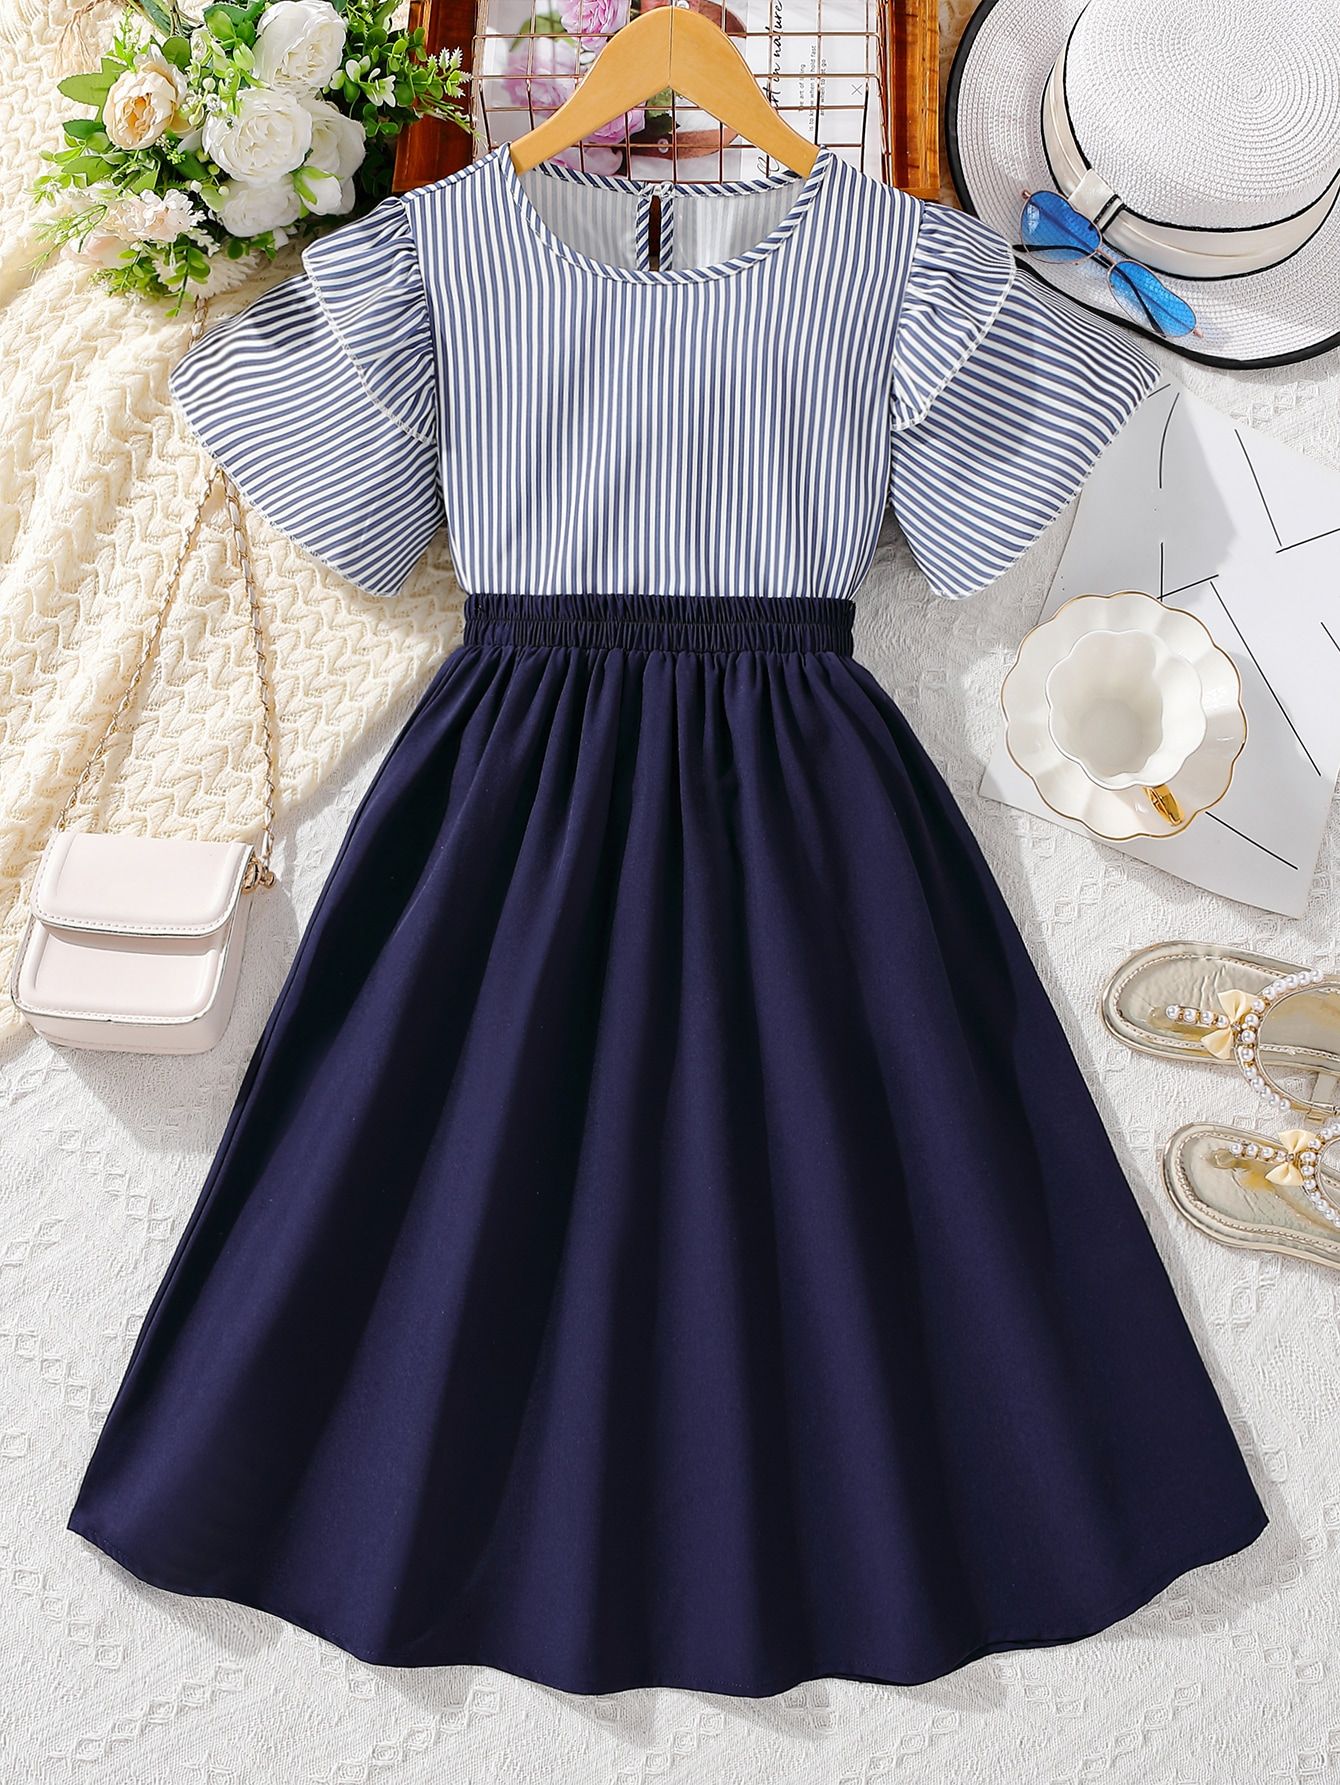 How to Style Blue and White Striped Dress: Best 13 Outfit Ideas for Ladies